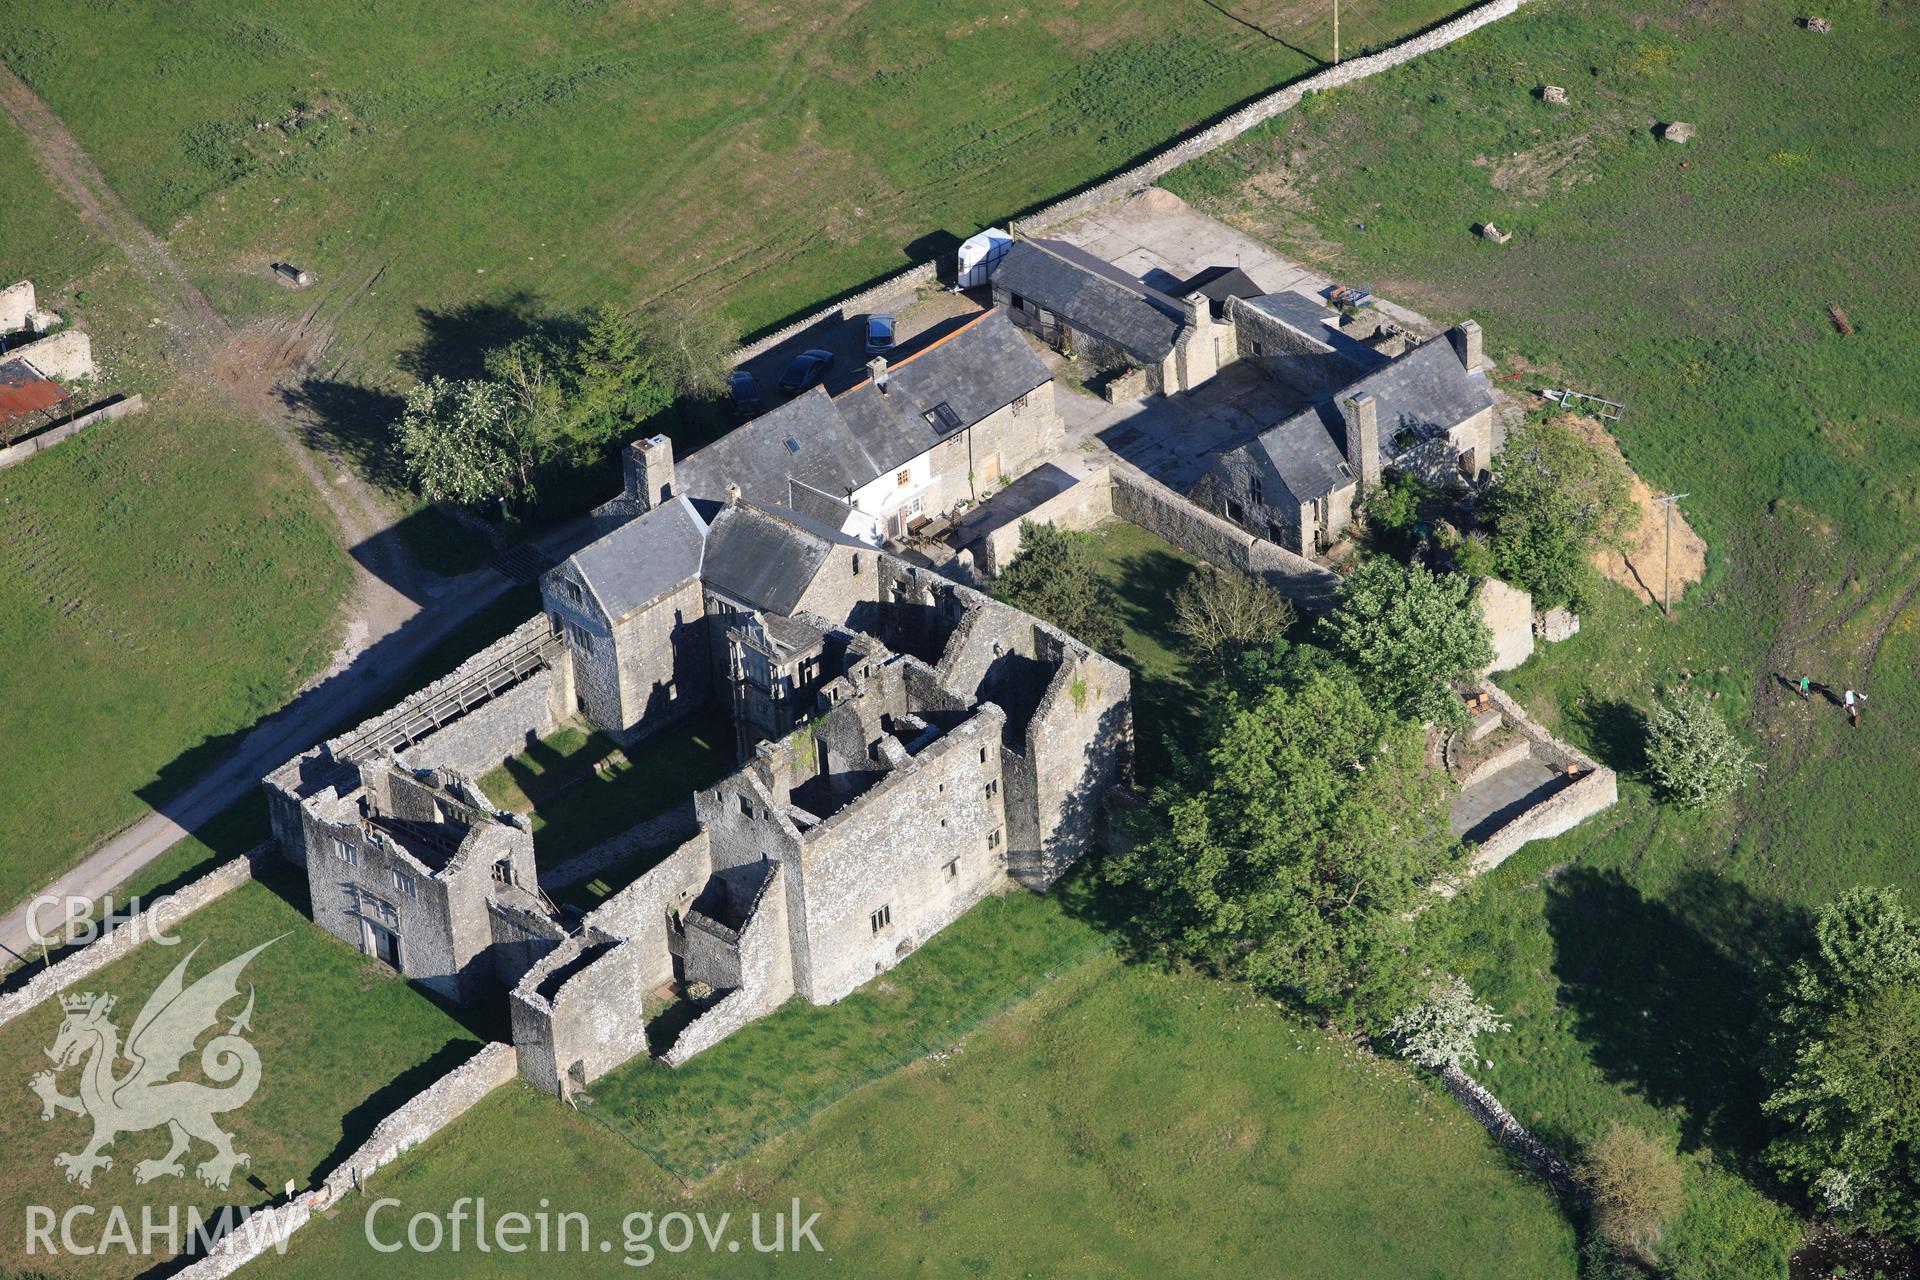 RCAHMW colour oblique photograph of Old Beaupre Castle. Taken by Toby Driver on 24/05/2010.